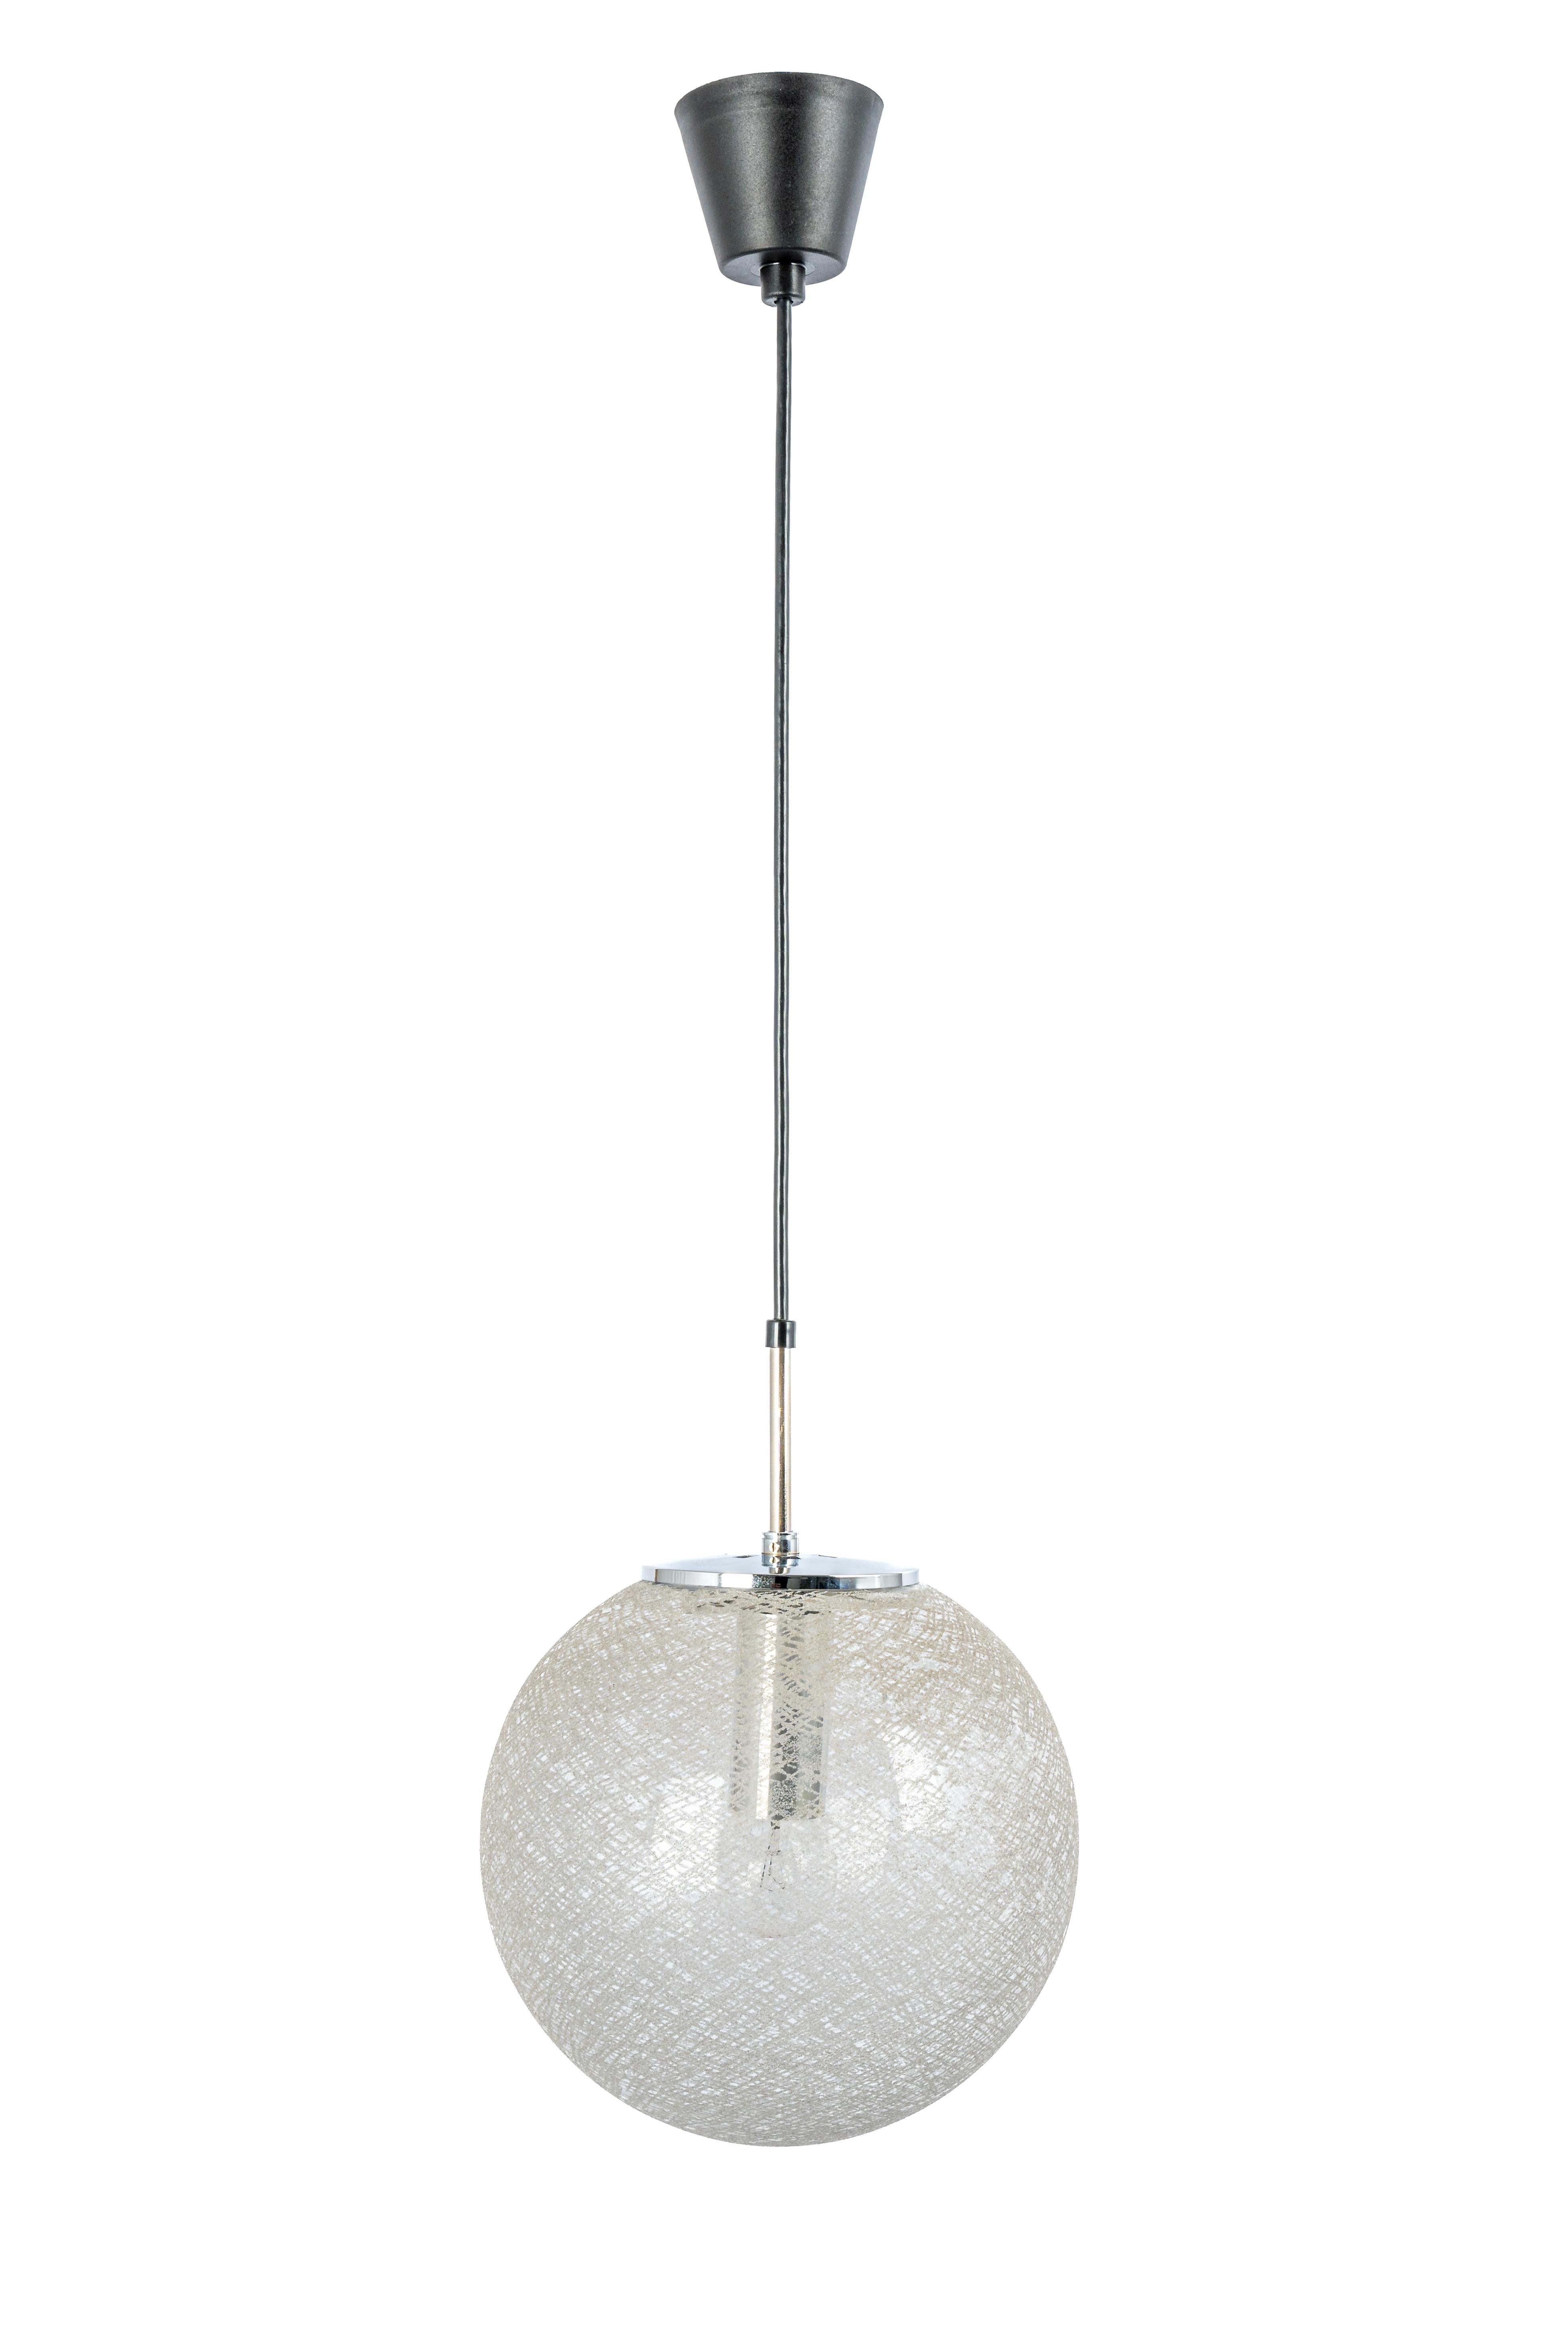 1 of 10 clear glass ball (hand-made) pendants, manufactured by Limburg, Germany, circa 1970-1979.

Sockets: 1 x E27 standard bulbs.
Light bulbs are not included. It is possible to install this fixture in all countries (US, UK, Europe, Asia,